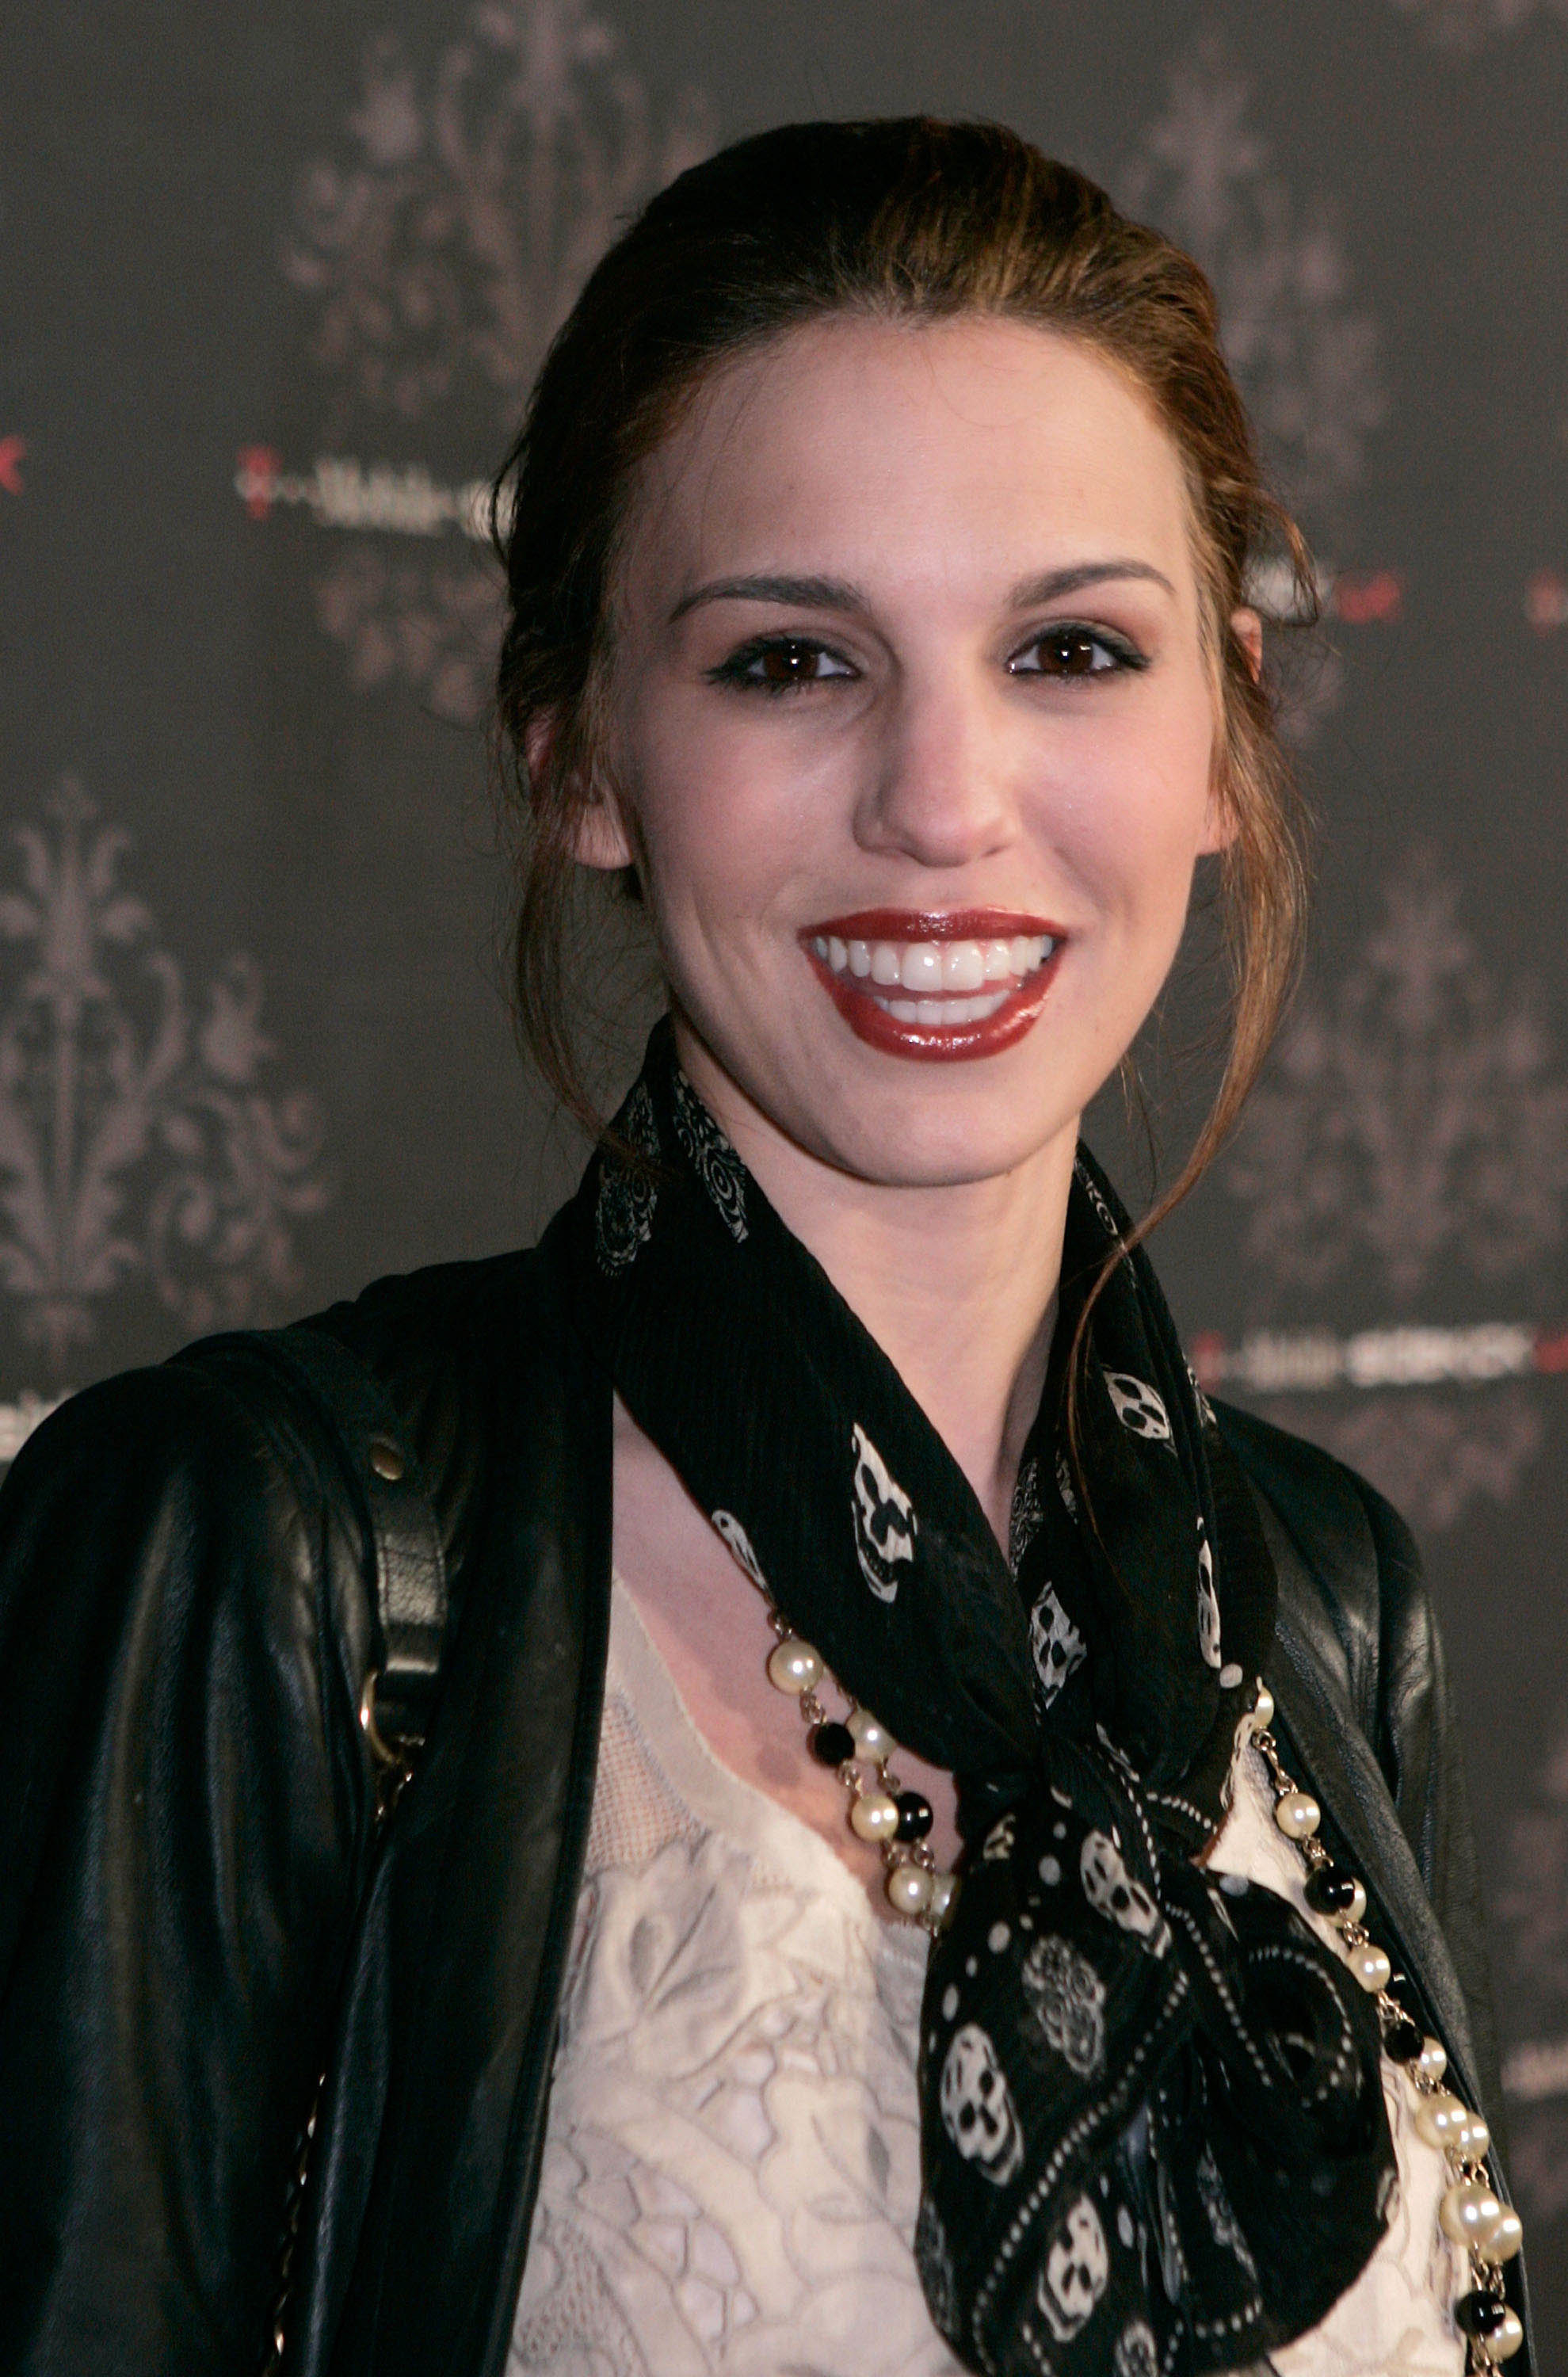 Actress Christie Carlson Romano attends the launch of the new T-Mobile Sidekick LX at The Clubhouse on October 16, 2007 in Los Angeles, California